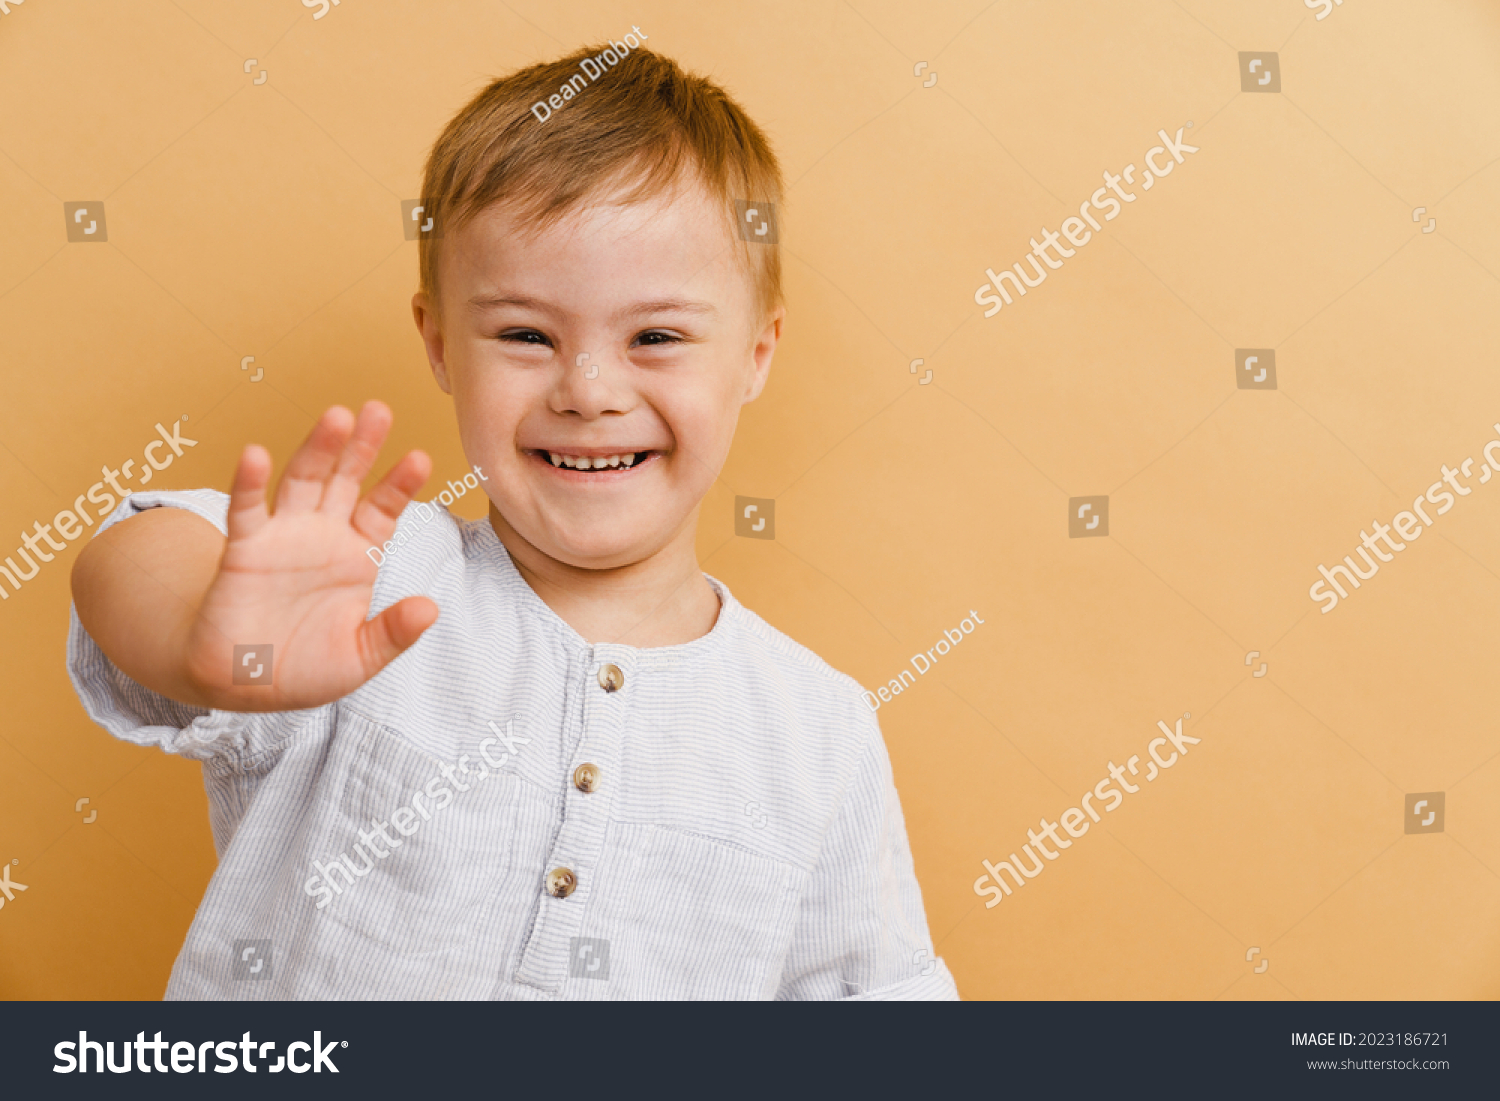 White boy with down syndrome smiling and gesturing at camera isolated over beige background #2023186721